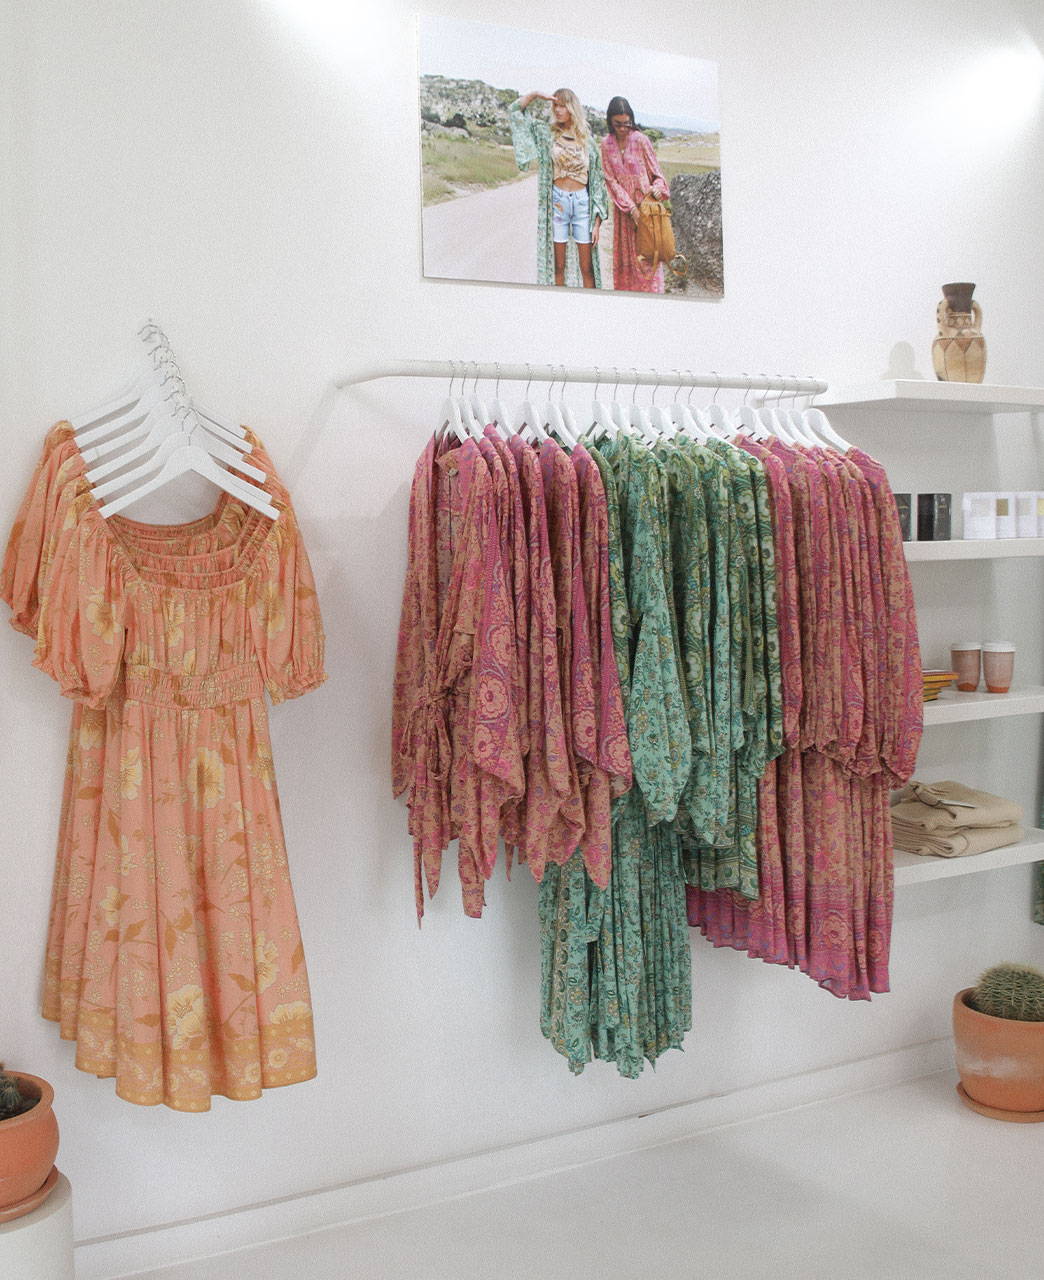 Images of the inspire of the Byron Bay Store featuring the Spell Folk Song collection and additional homewares products. 